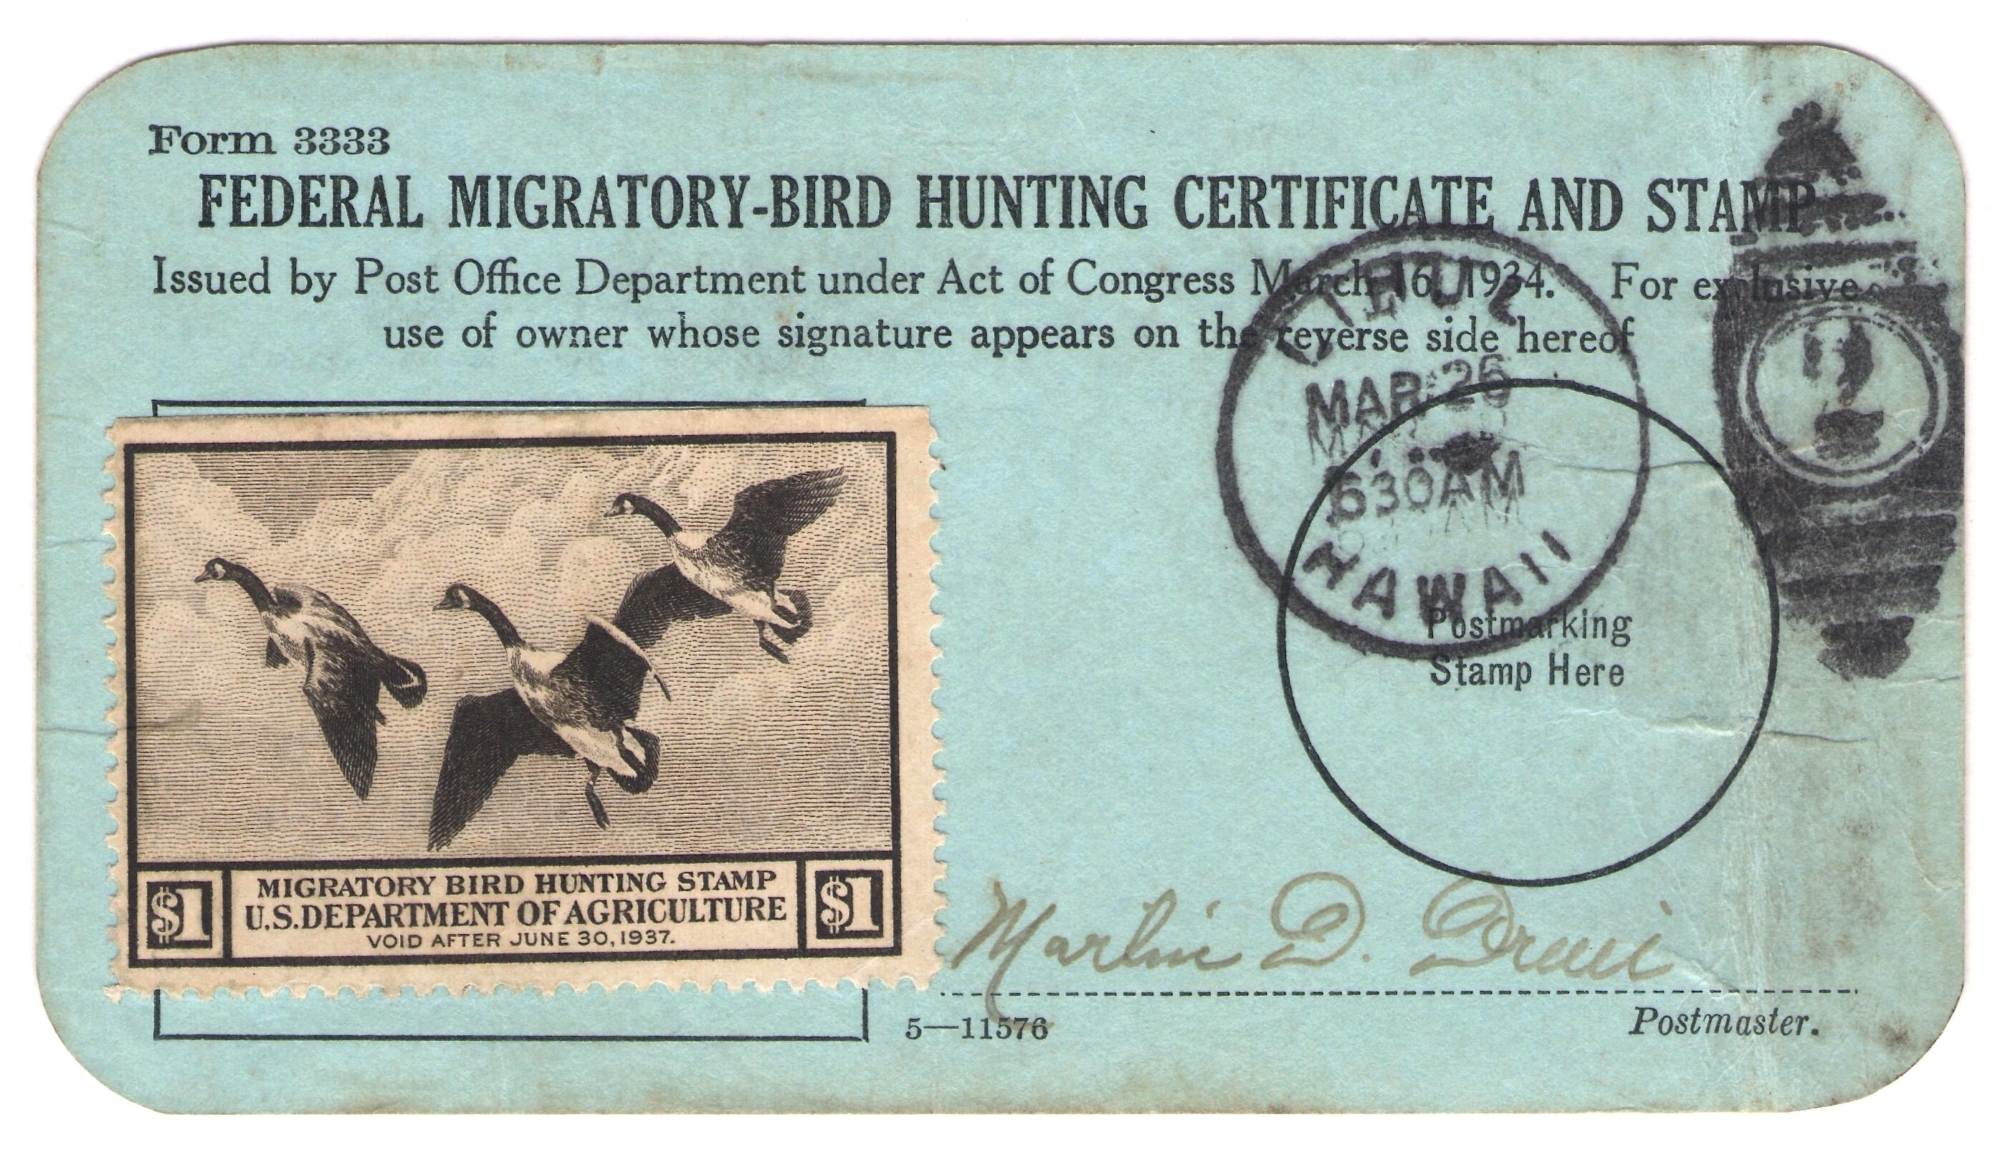 RW3 on Form 3333 cancelled March 26, 1937 at Lihue, Hawaii